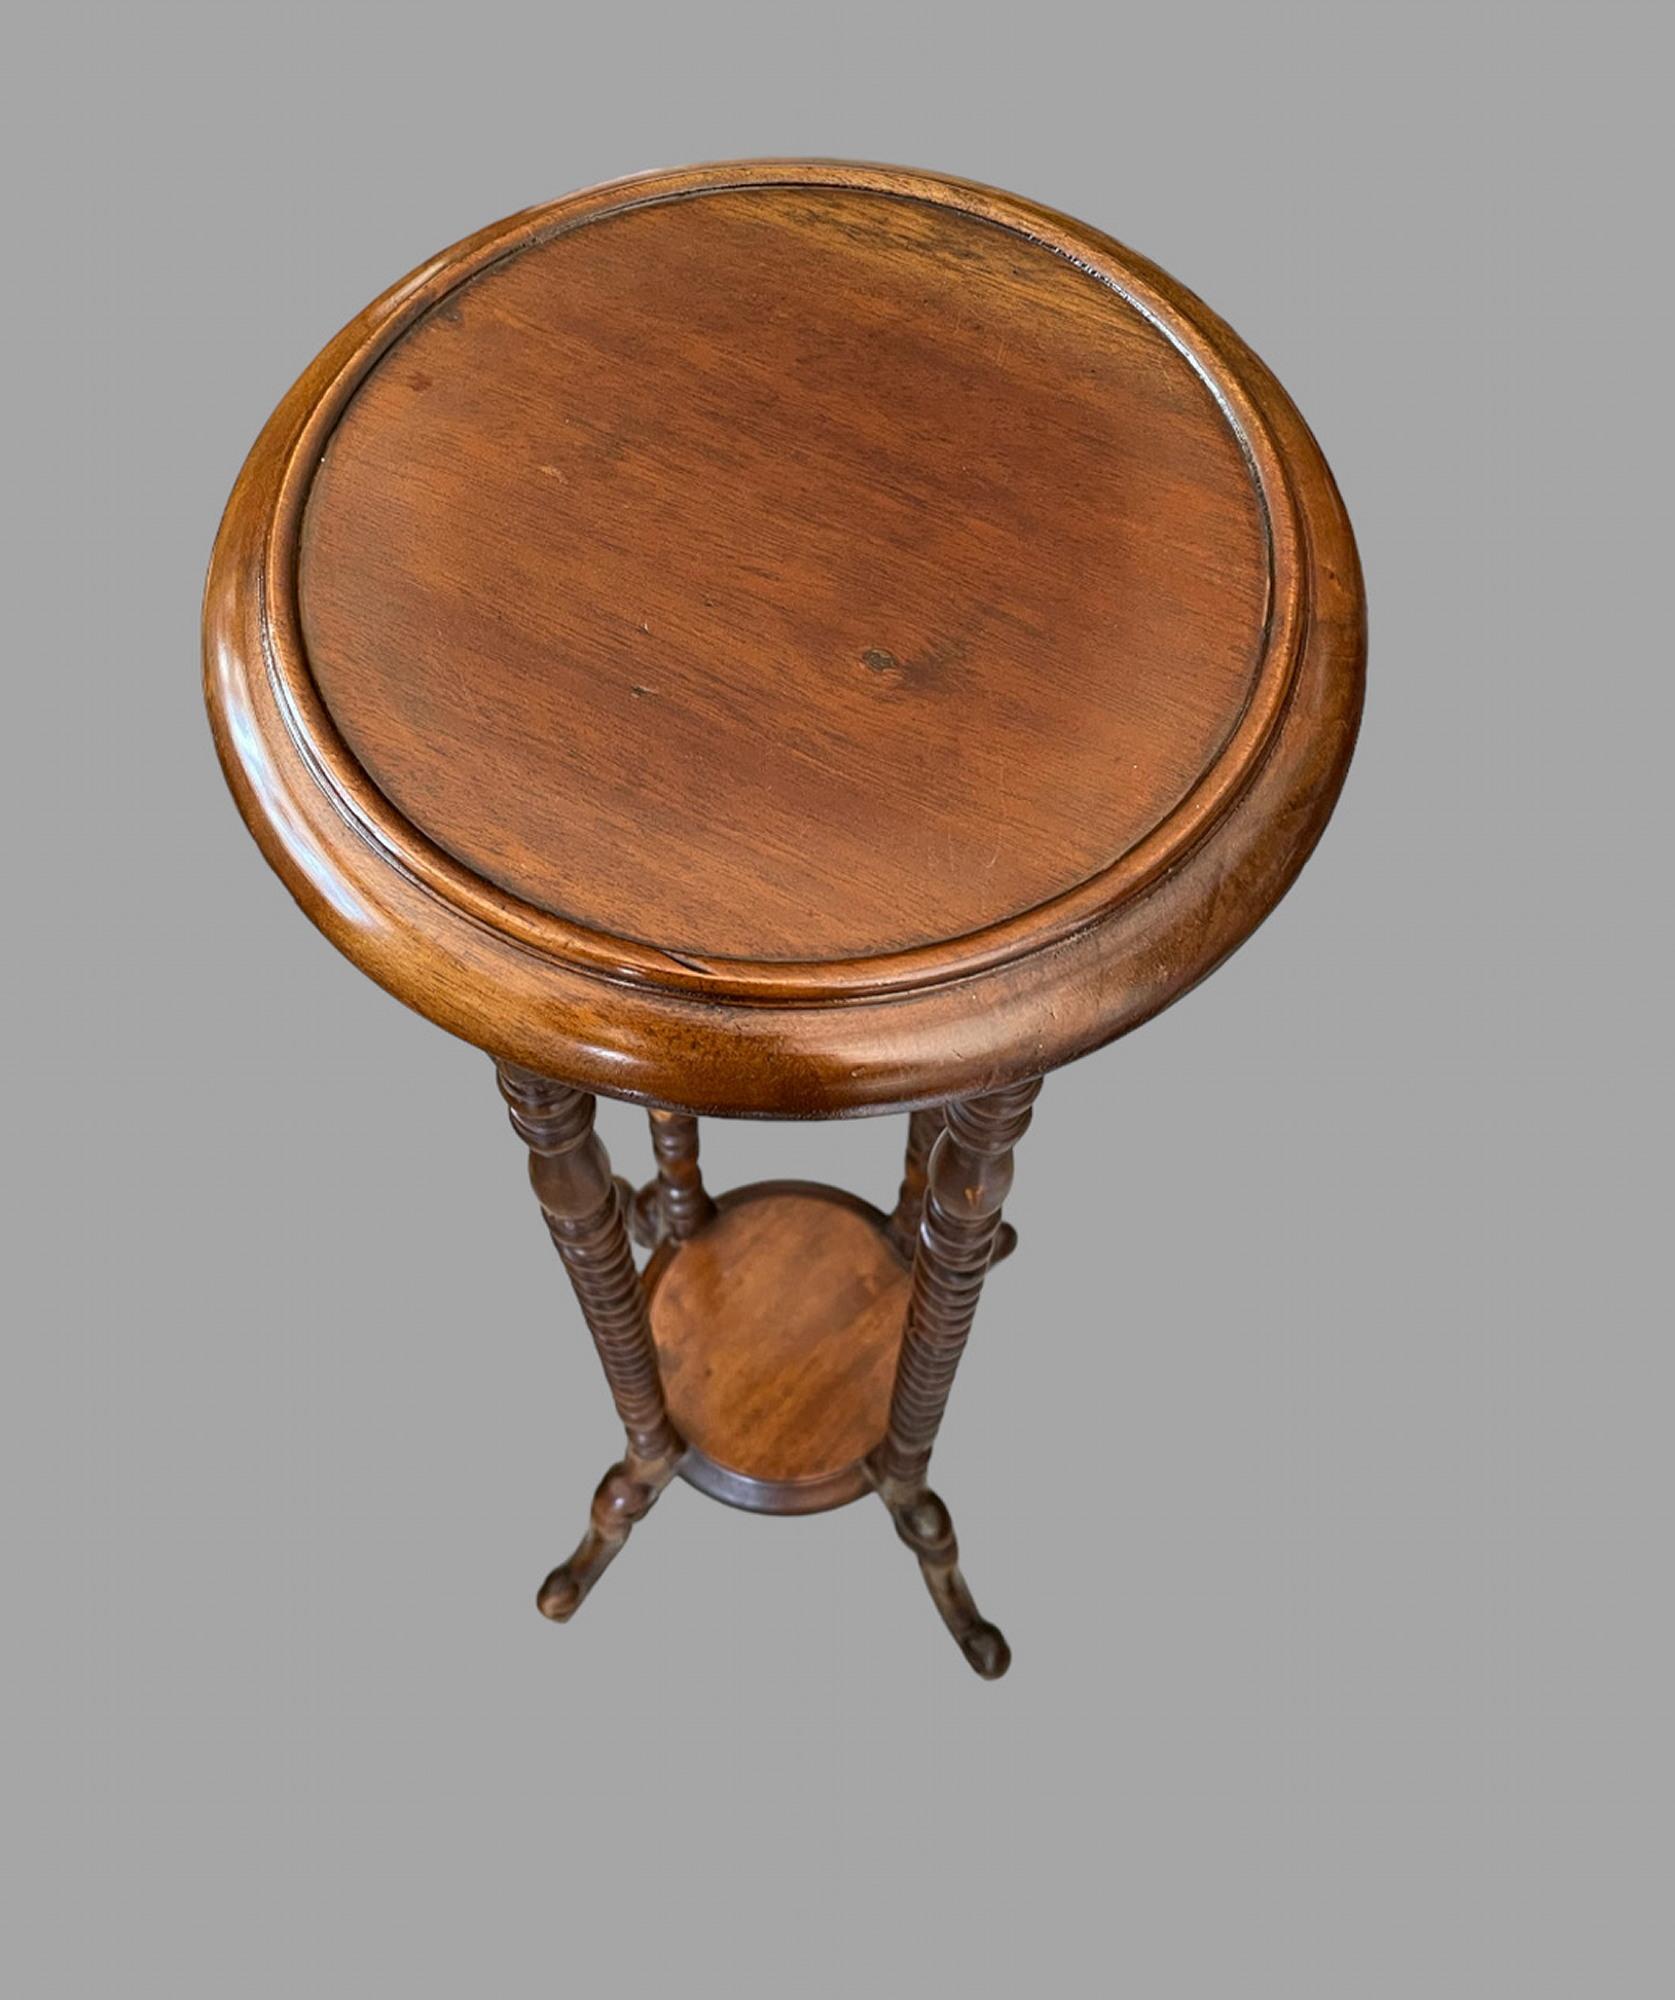 A Pair of Hand Carved English Mahogany Torchieres dating from late Georgian period. Tapered post mounted on cabriole legs the post turned with rings and dual pitched barley twists. Solid and ideal for many purposes.